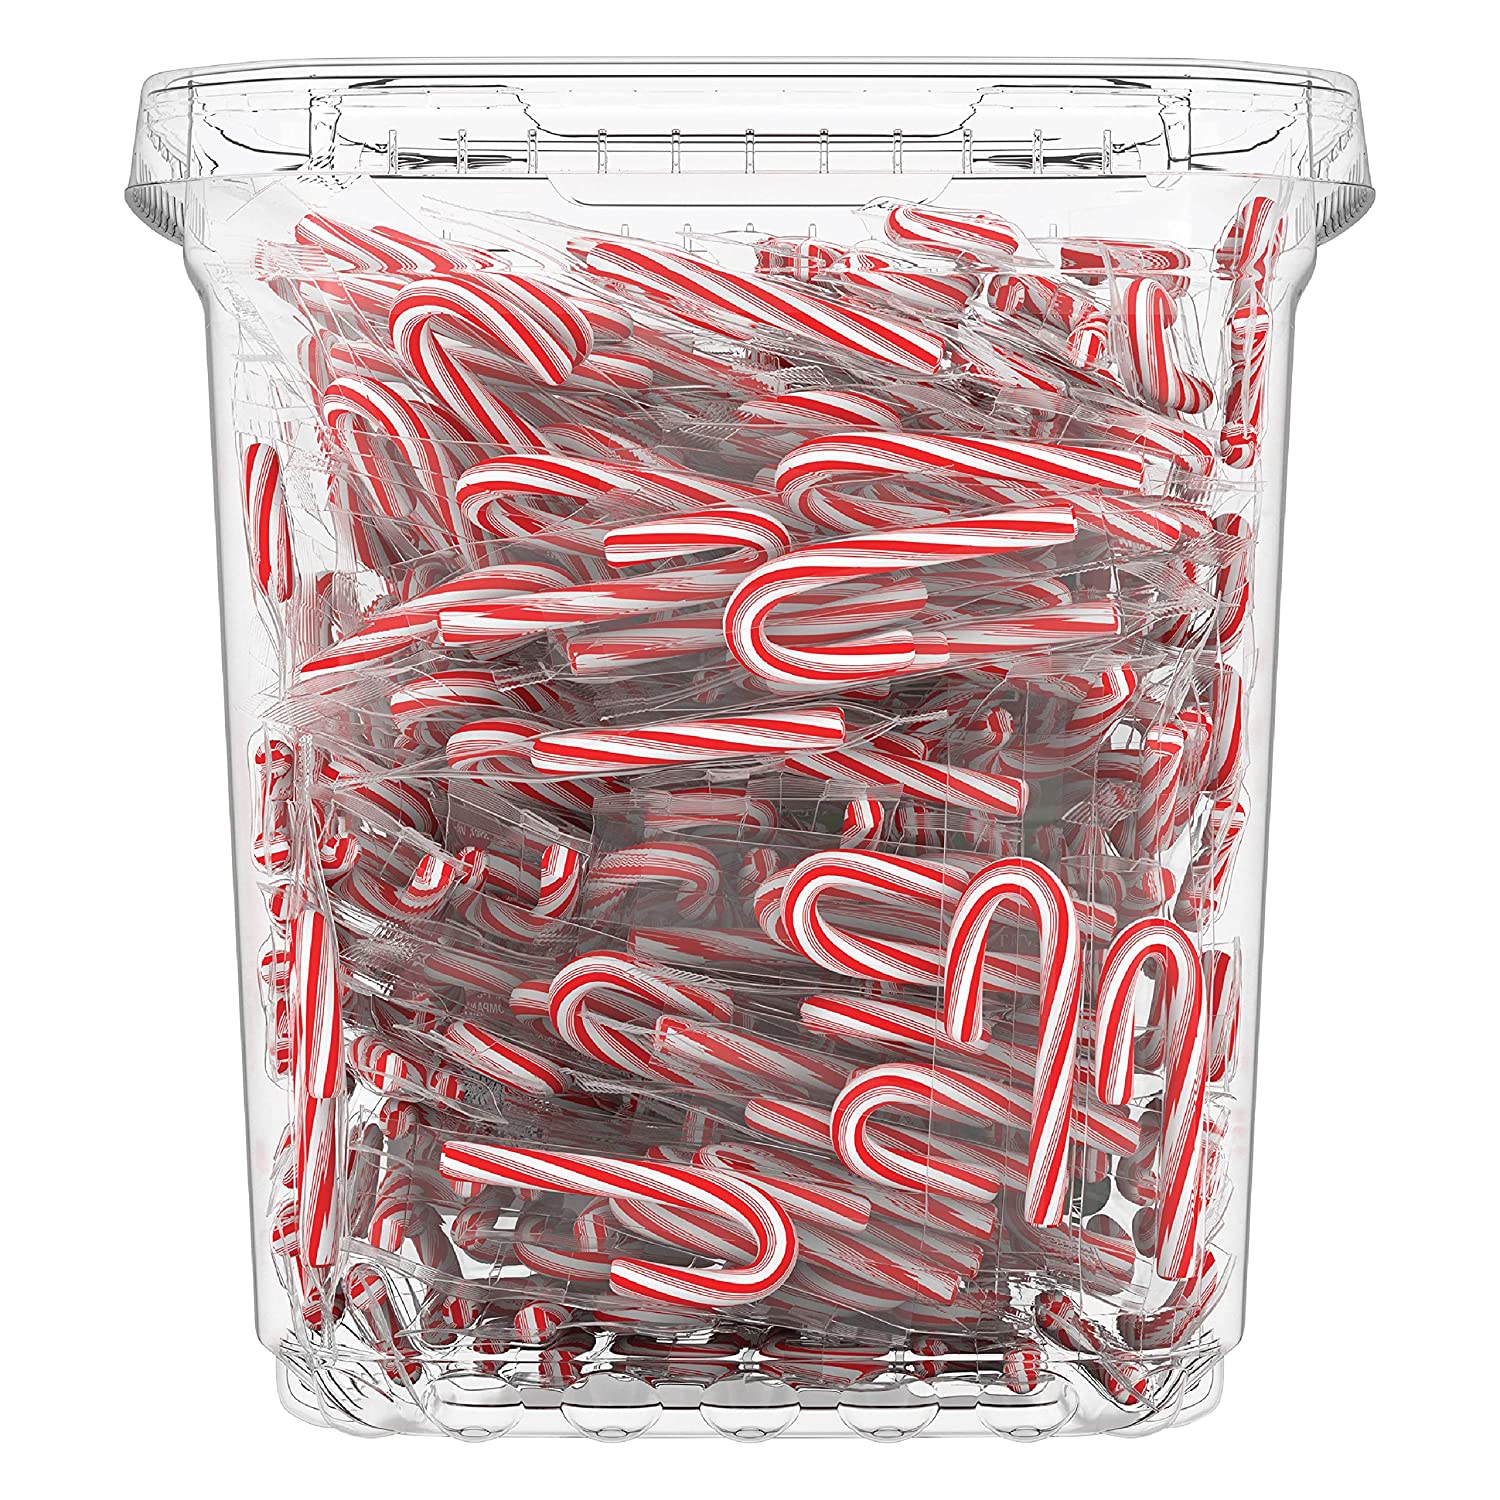 MINI CANDY CANES